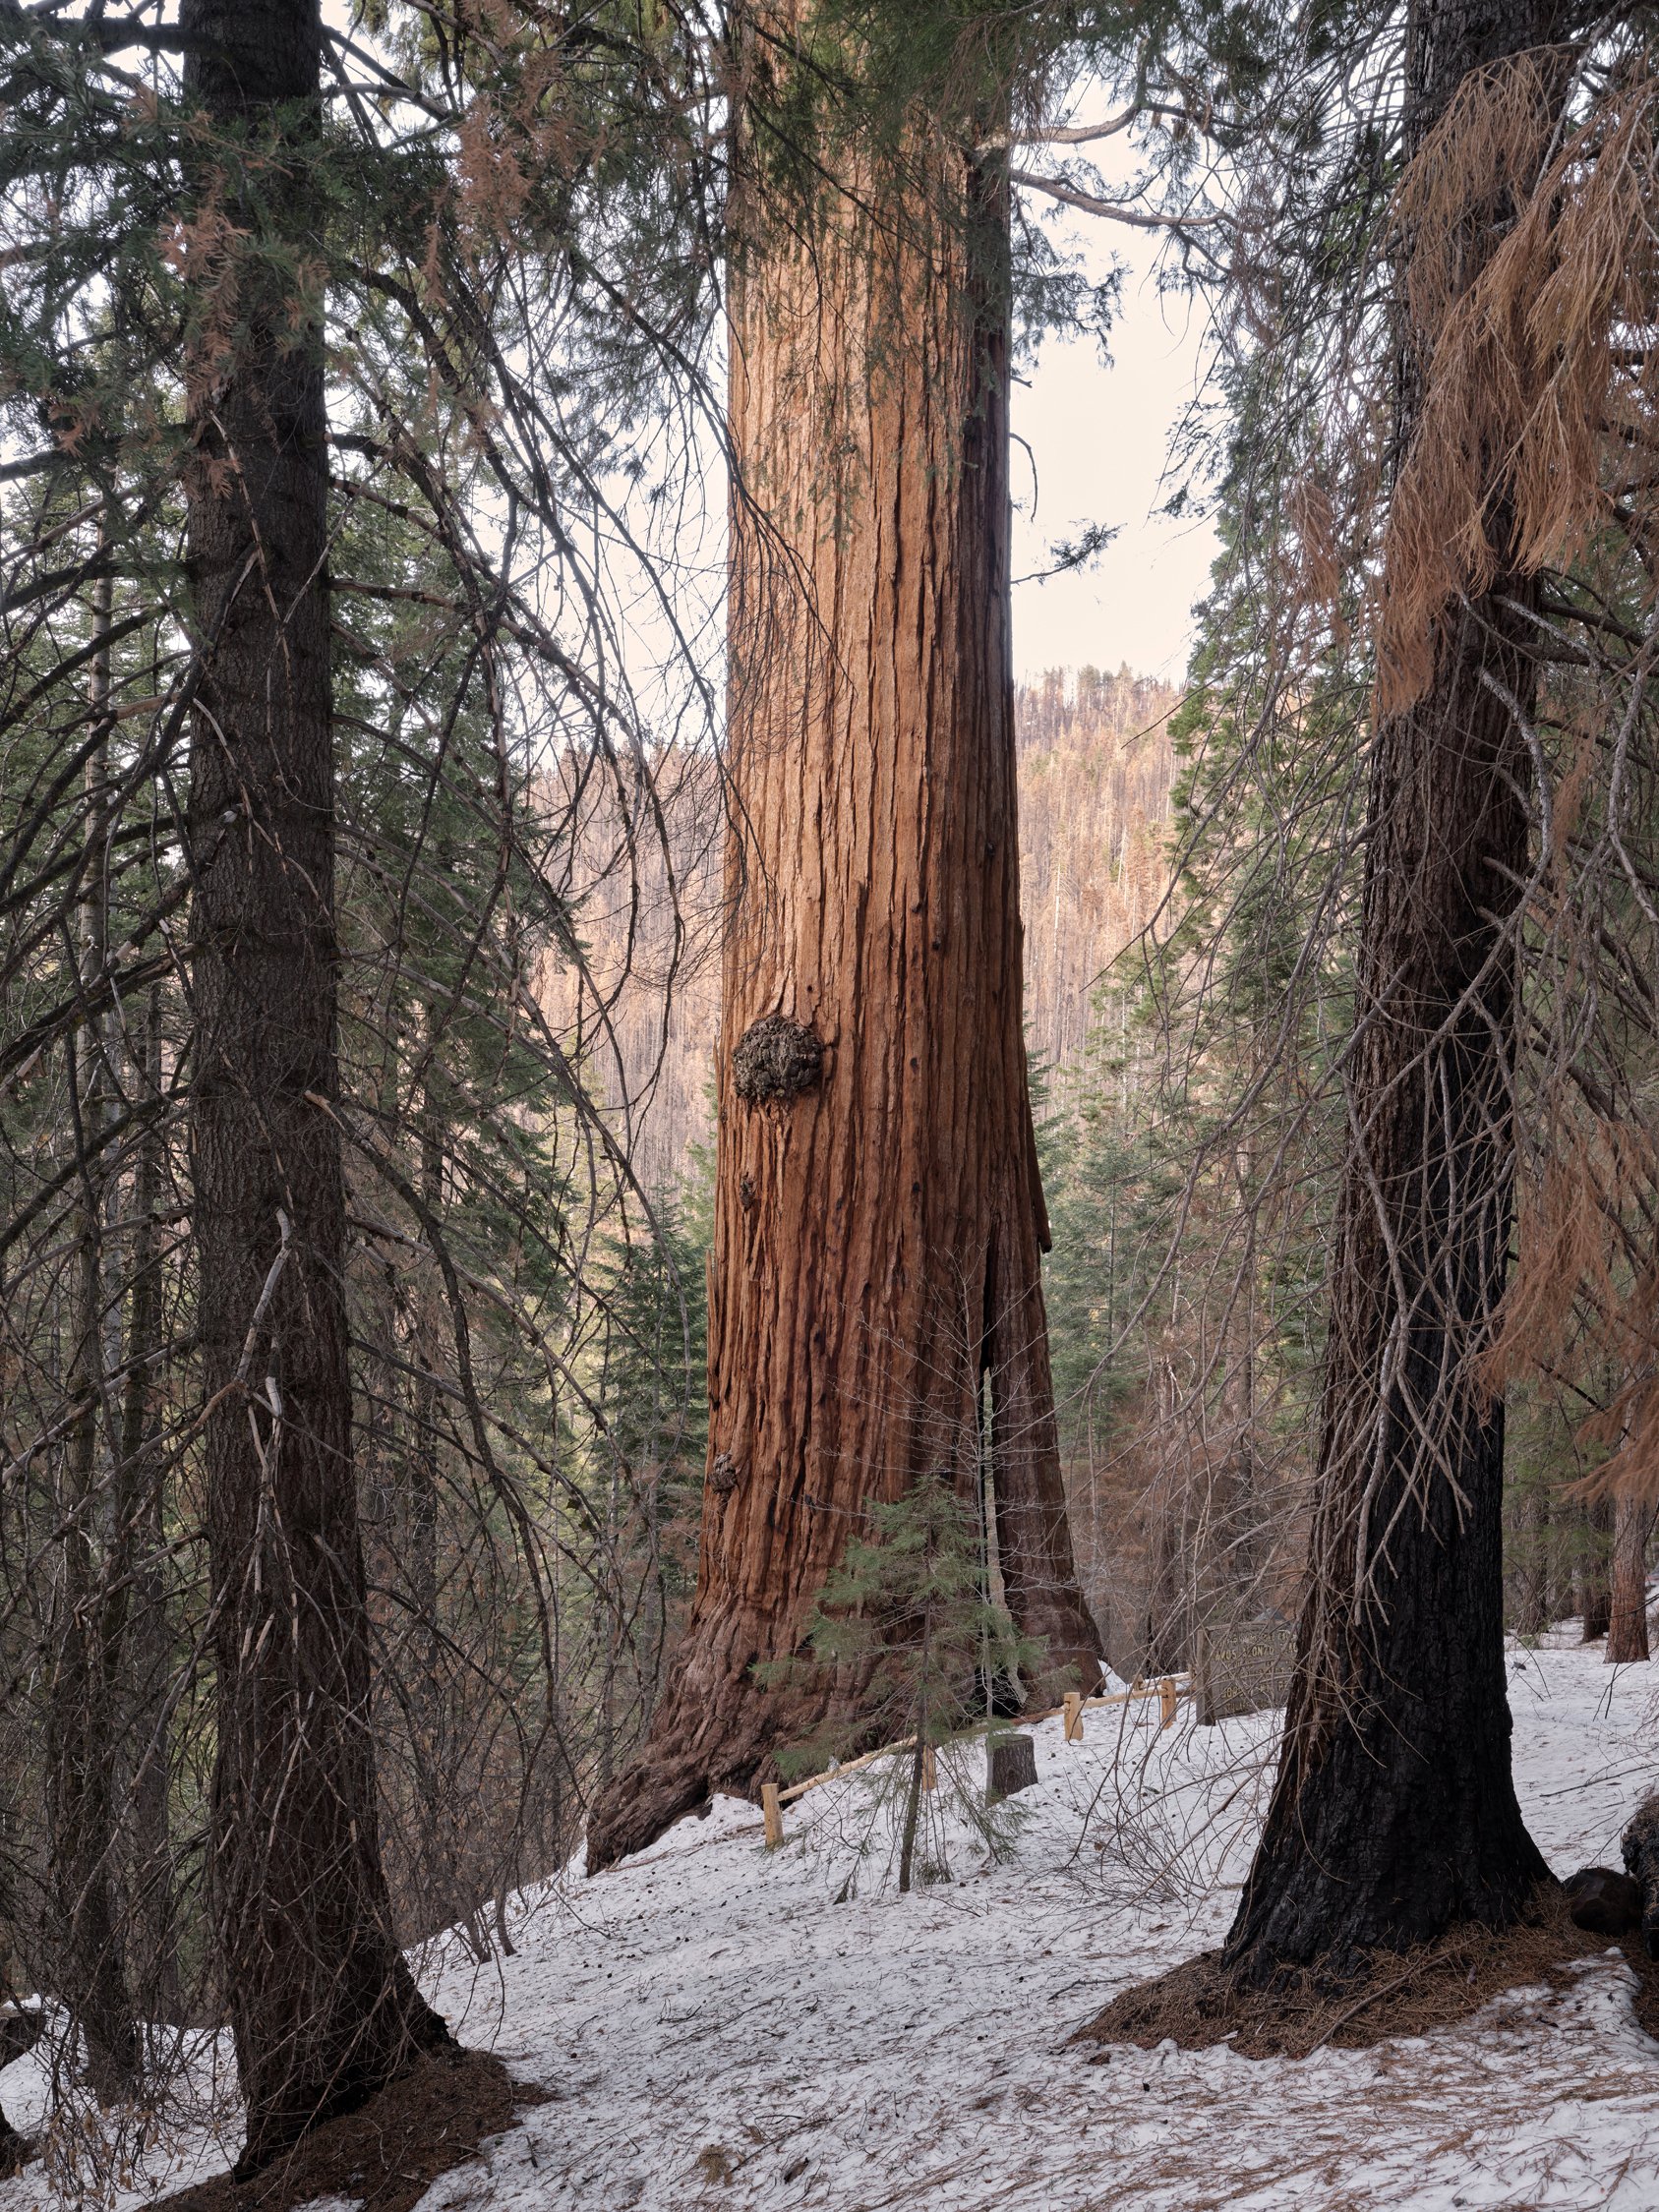 gathering_growth_foundation_stagg_tree_giant_sequoia_brian_kelley_02-2022_02.jpg